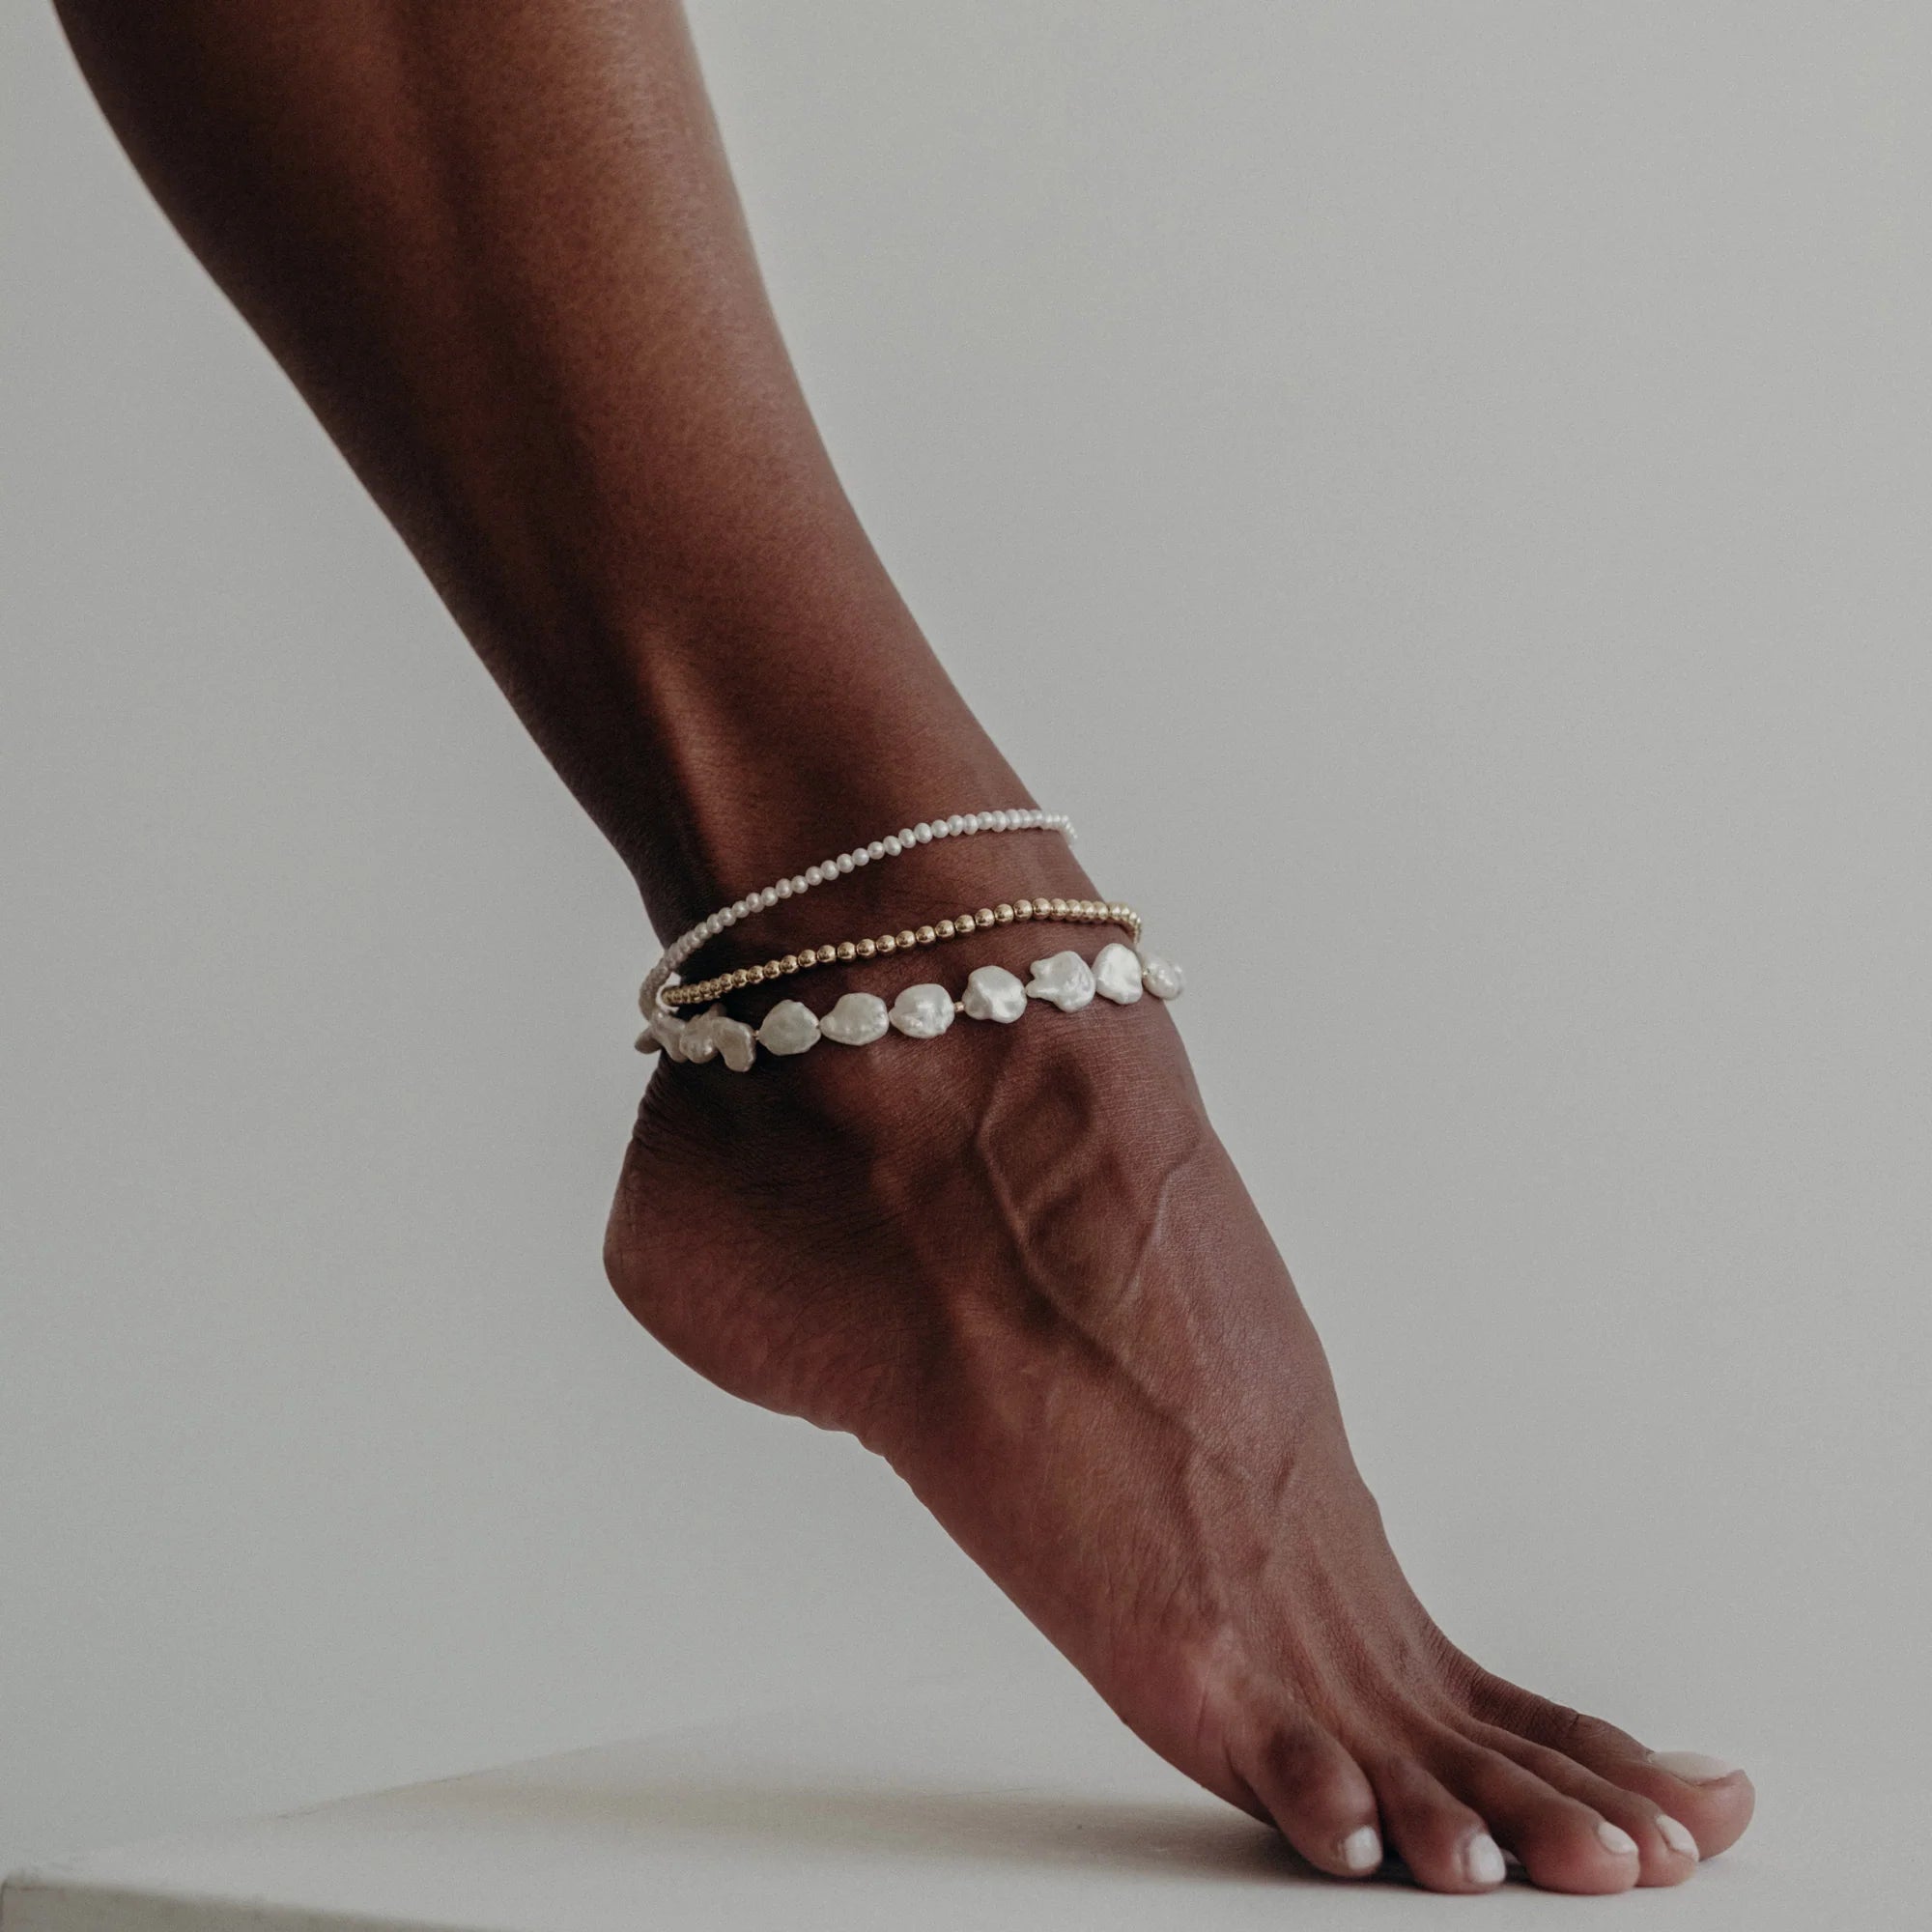 Pearl Anklets - Timeless Beauty & Sophisticated Style